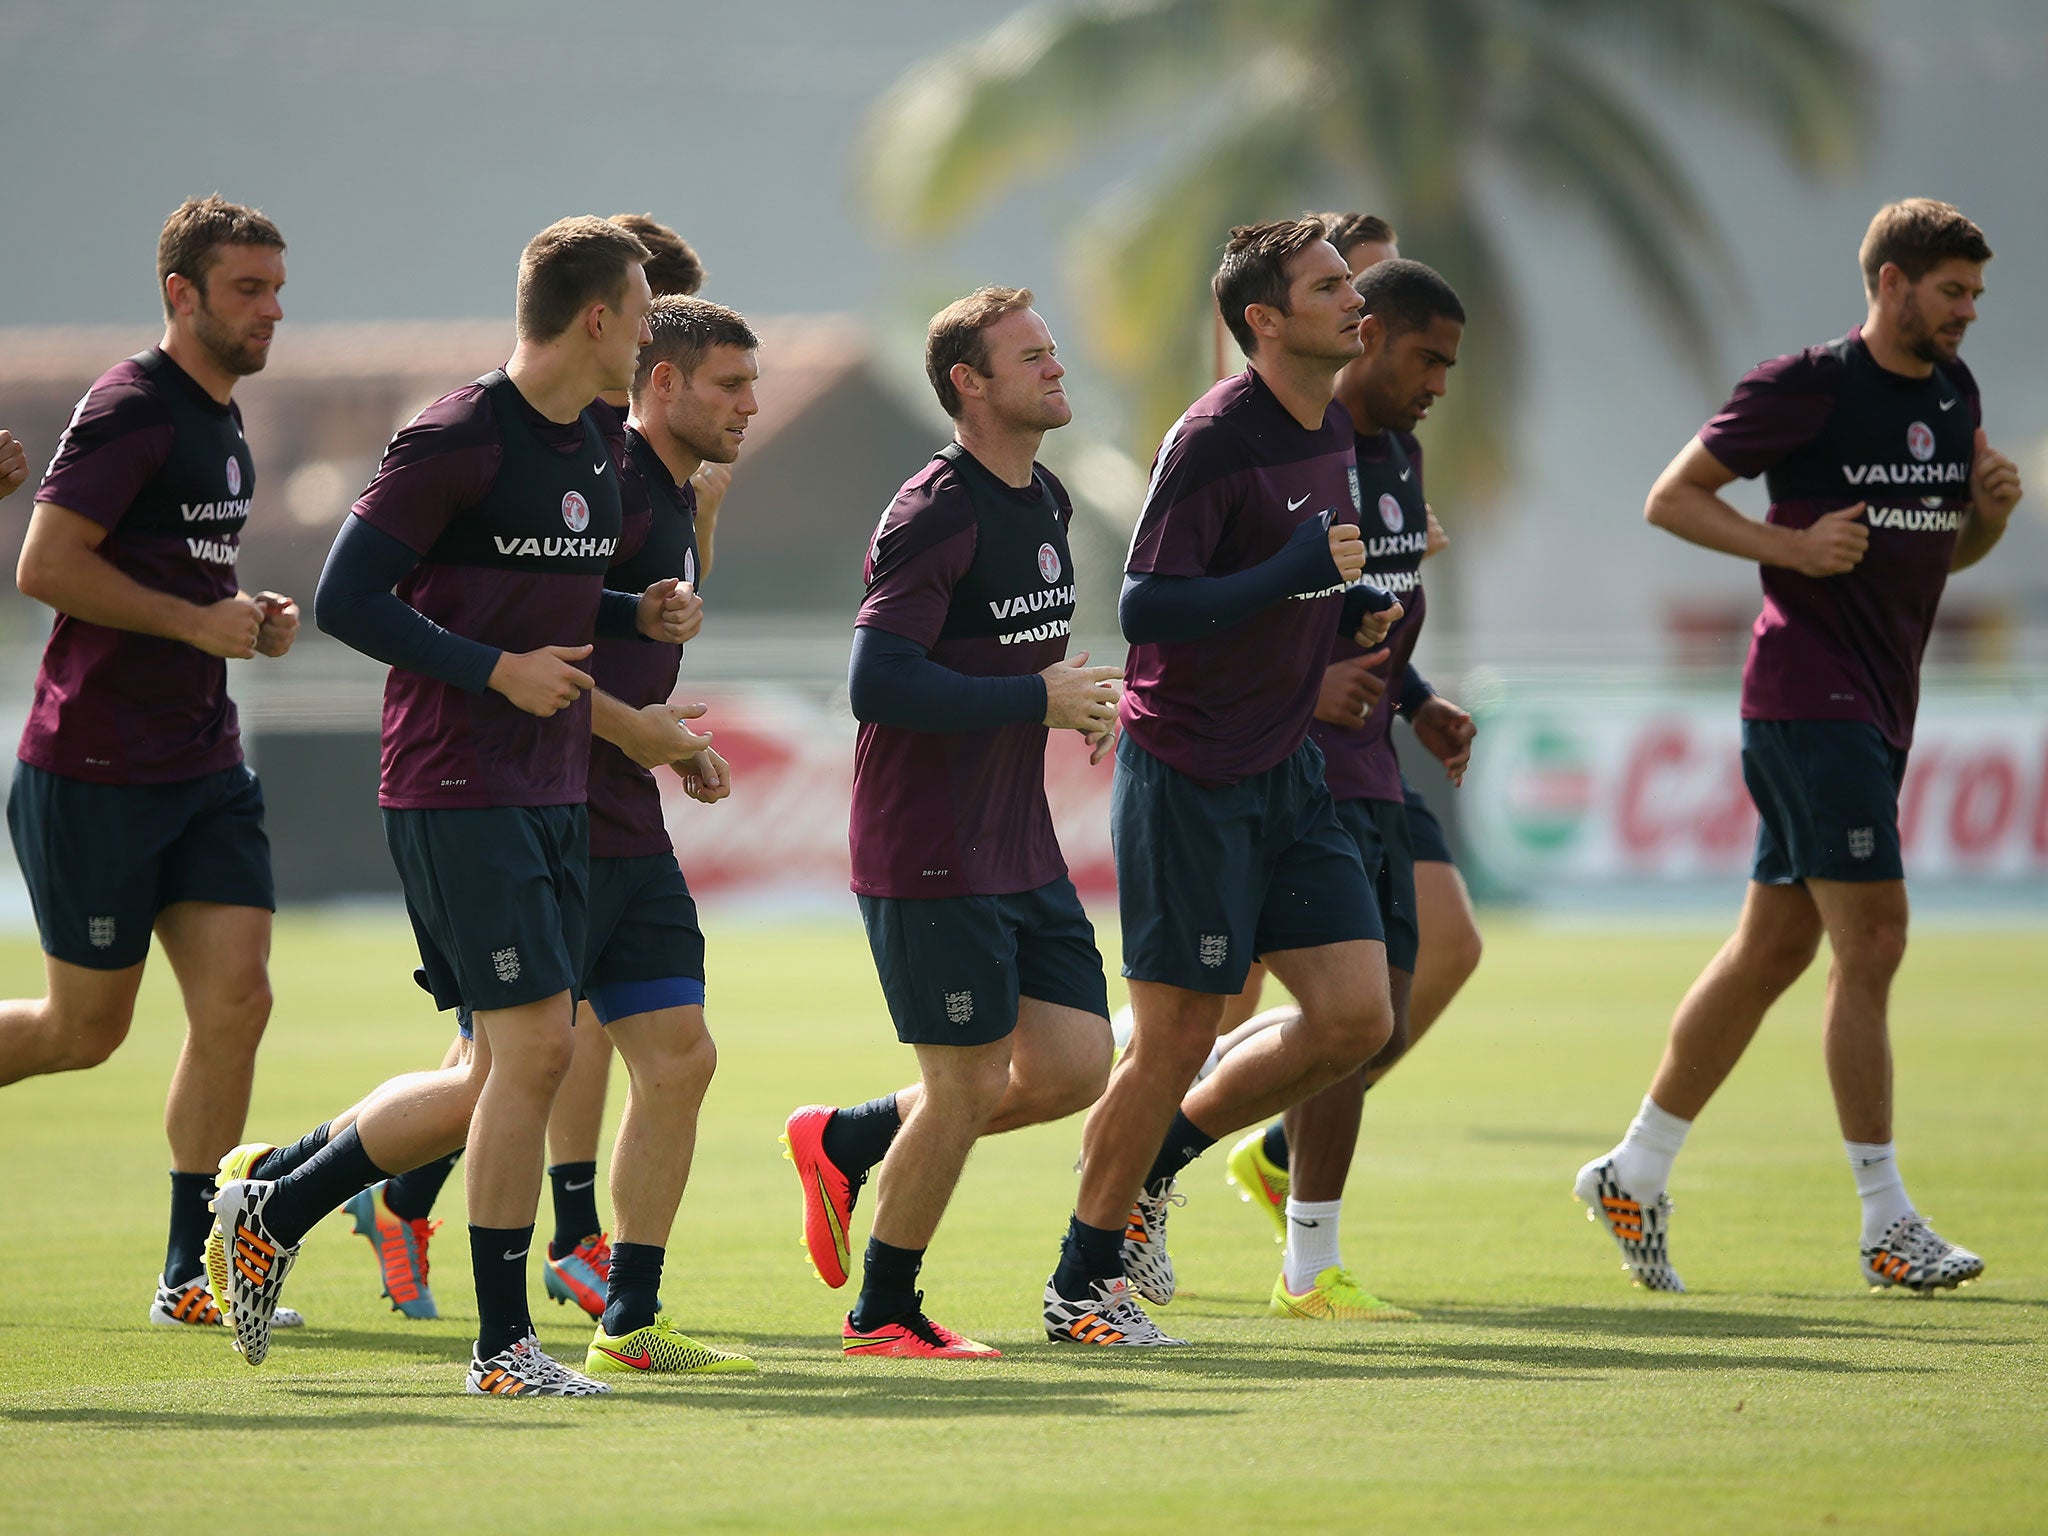 Wayne Rooney and Frank Lampard of England run with team mates during a training session at the Urca military base on June 11, 2014 in Rio de Janeiro, Brazil.